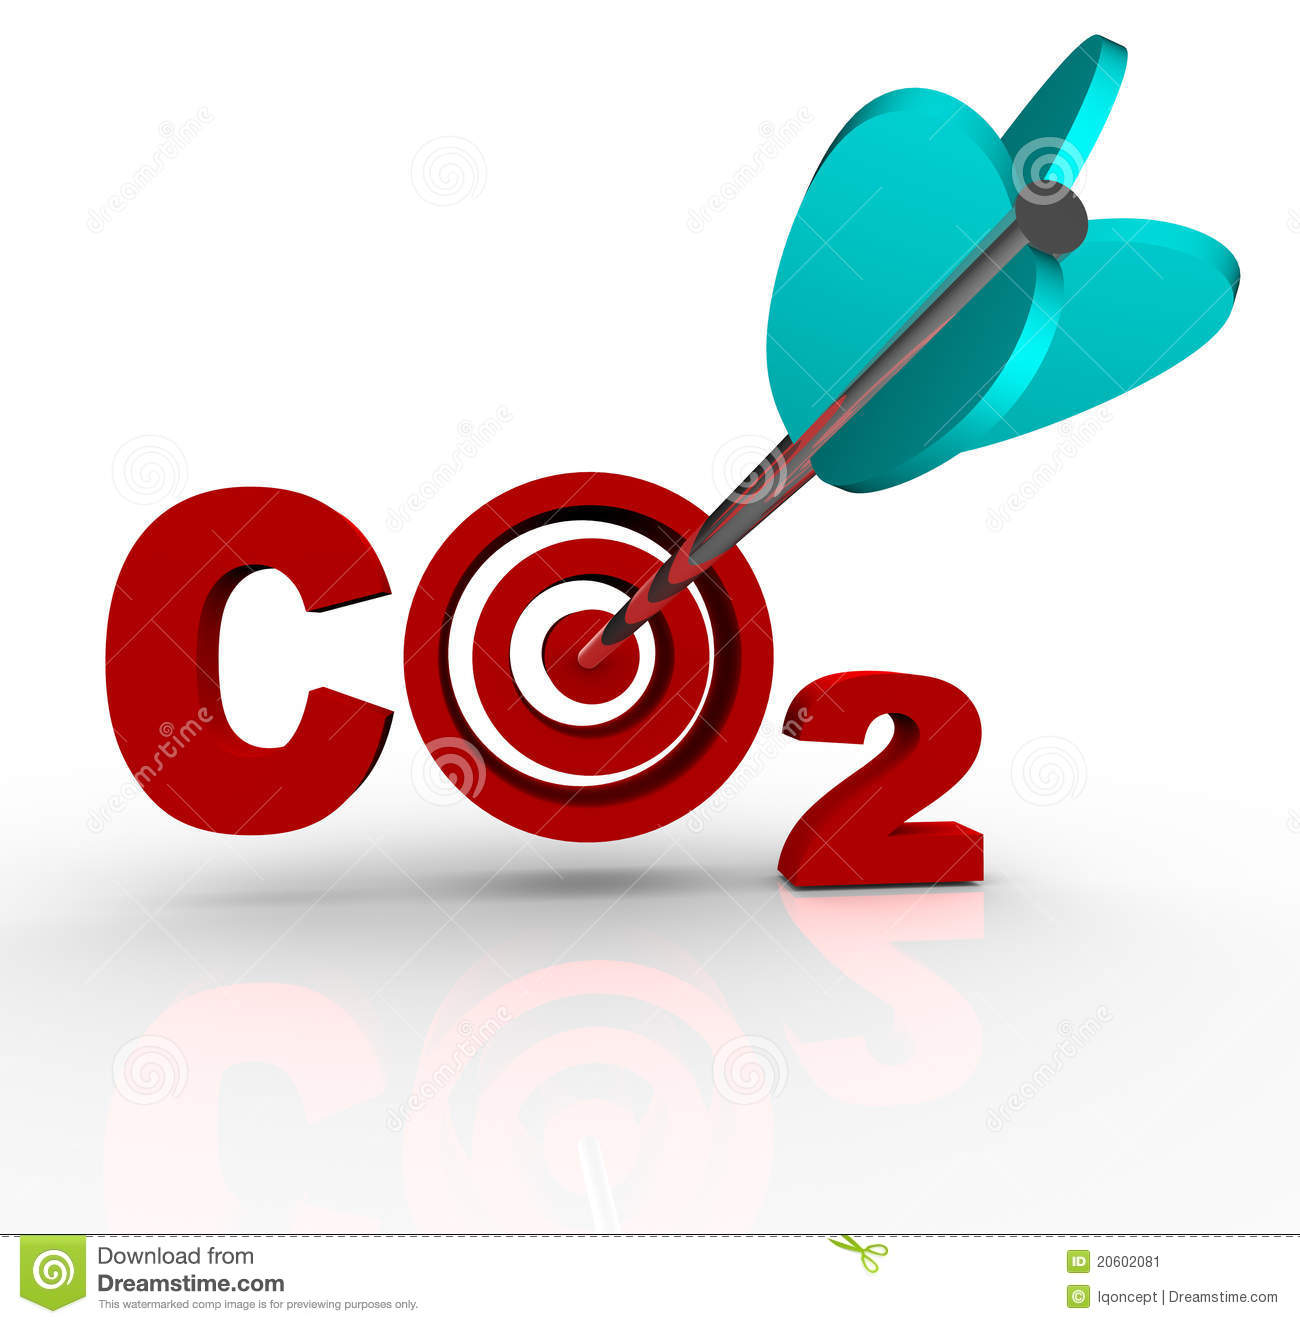 The Letters Co2 Representing Carbon Dioxide With A Target Bulls Eye In